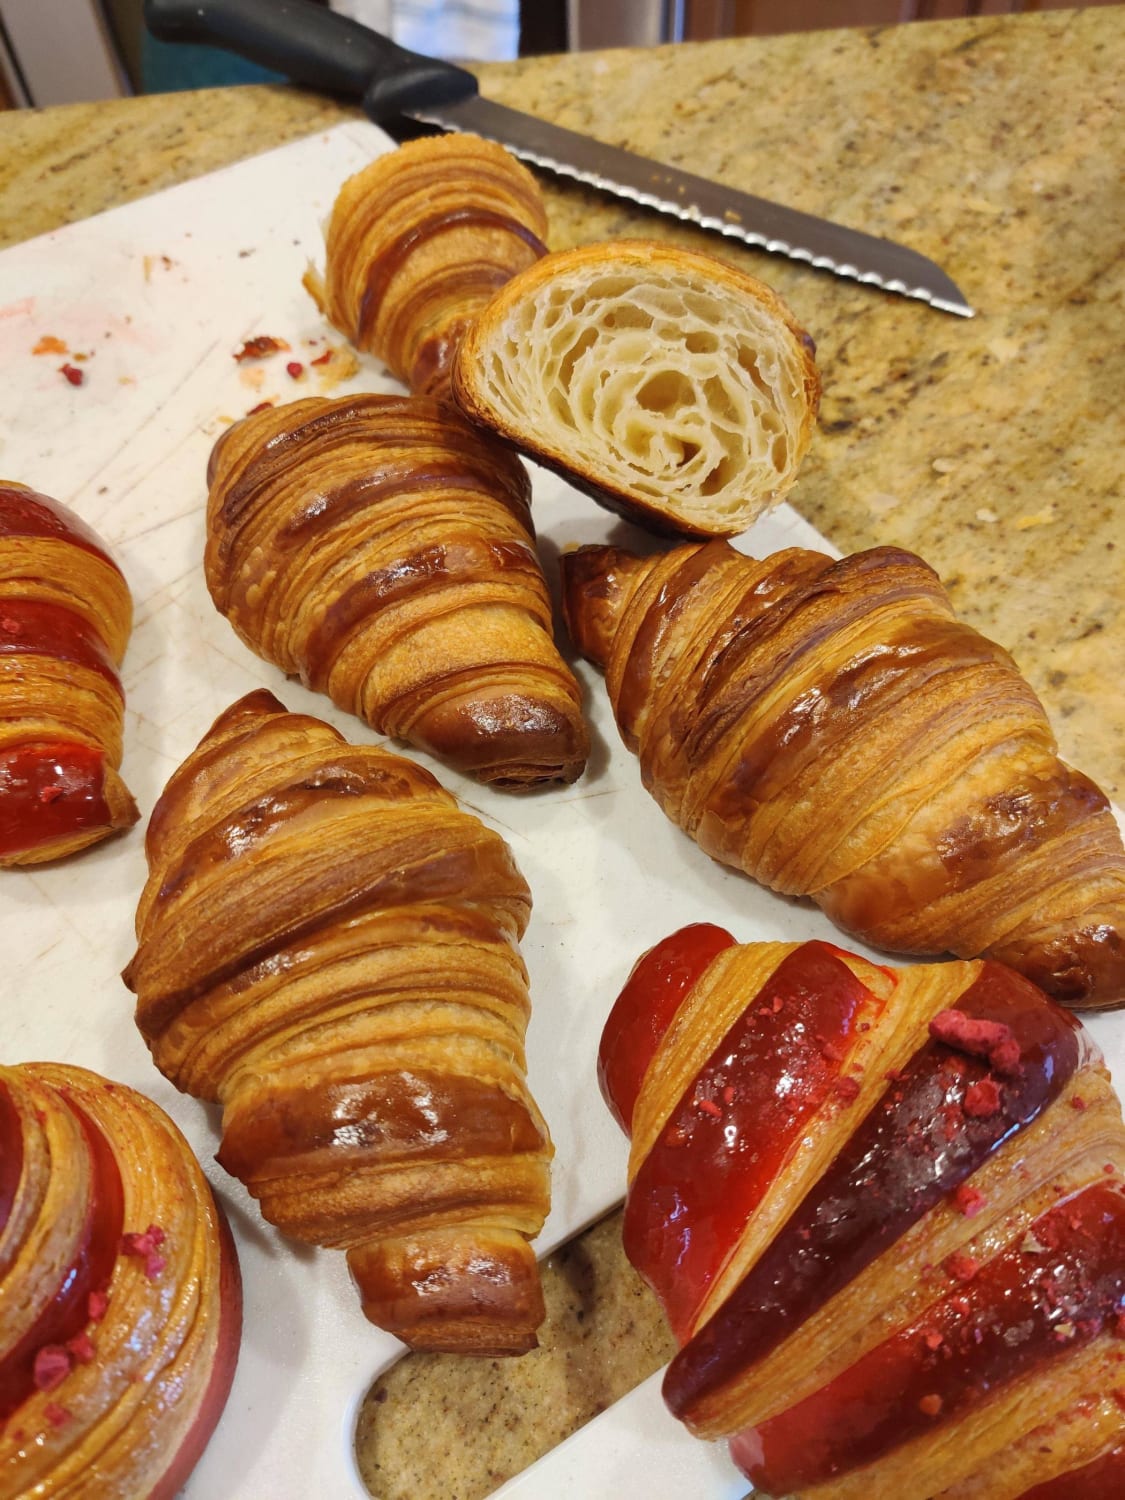 Some croissants I made today. The red ones are filled with rose-lychee cream and raspberry jam!